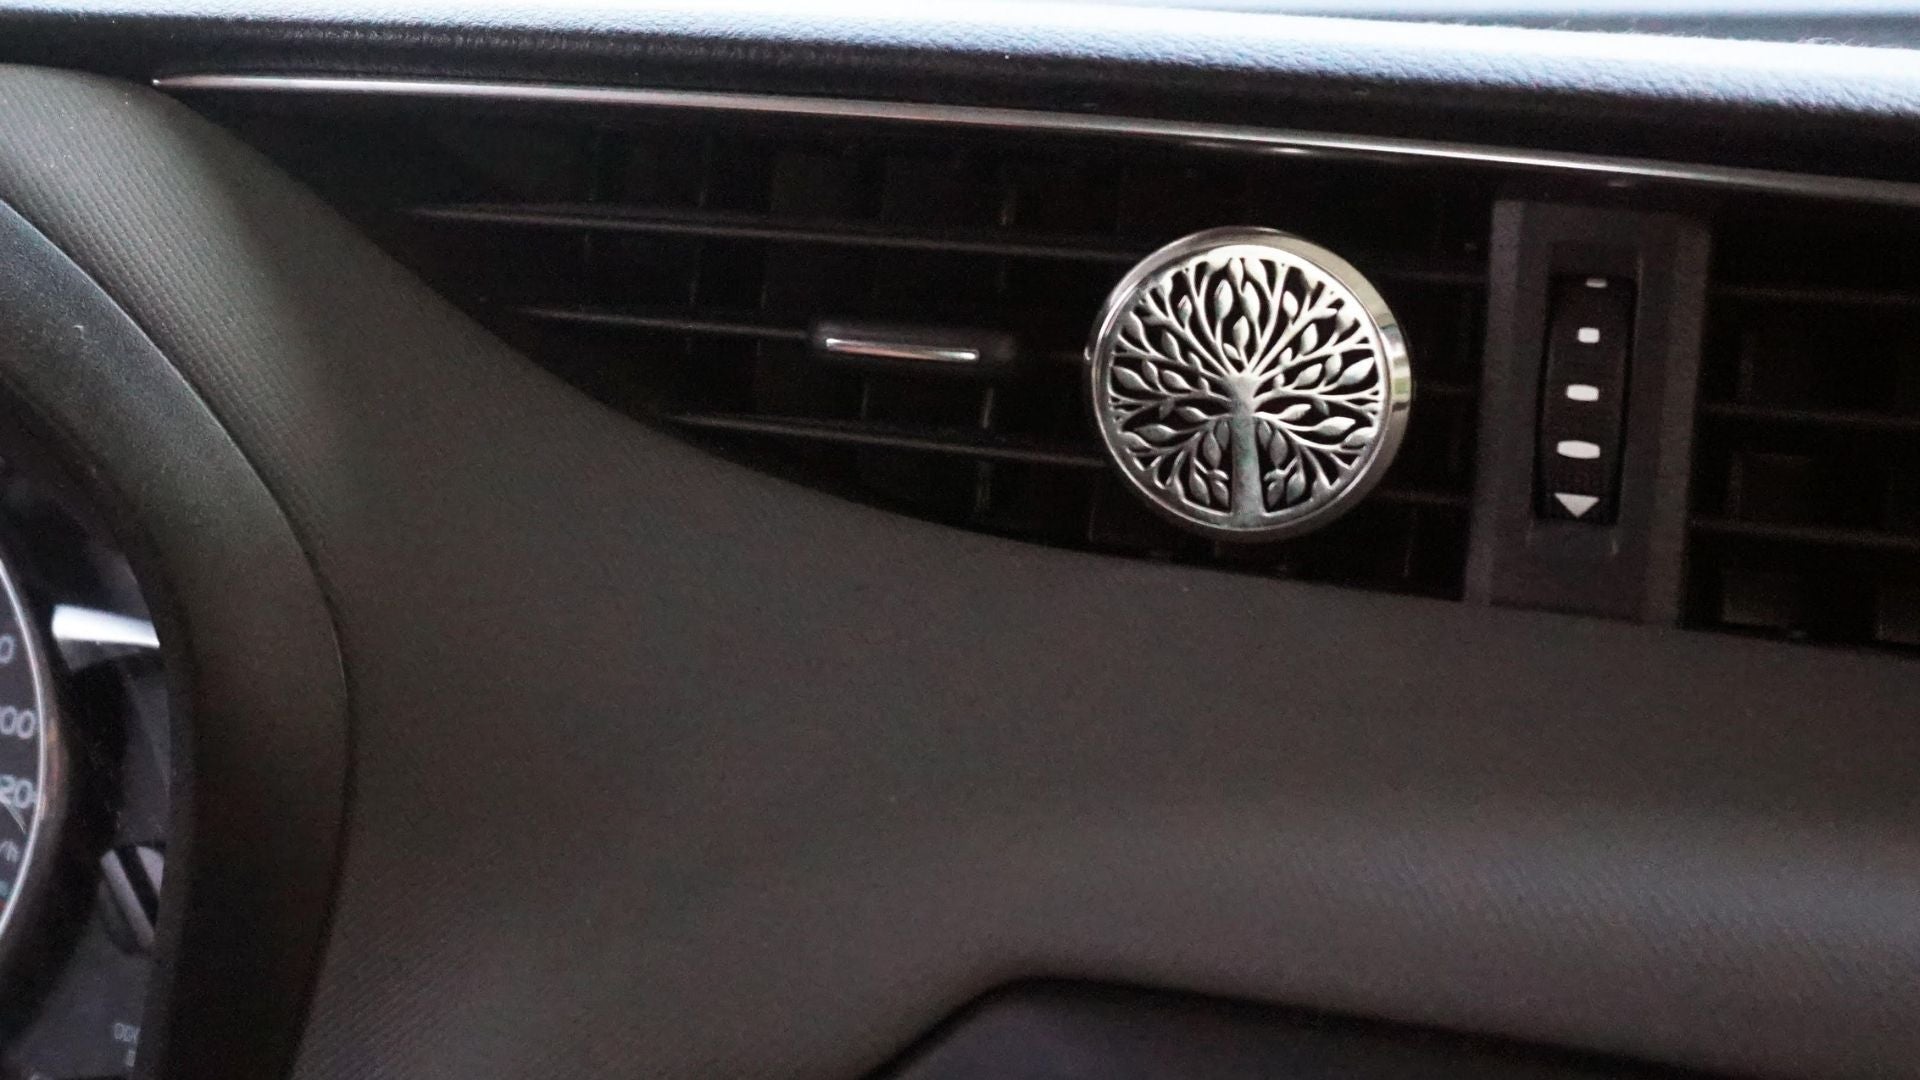 Is It Safe To Use Essential Oil Diffusers in Your Car? – Escents